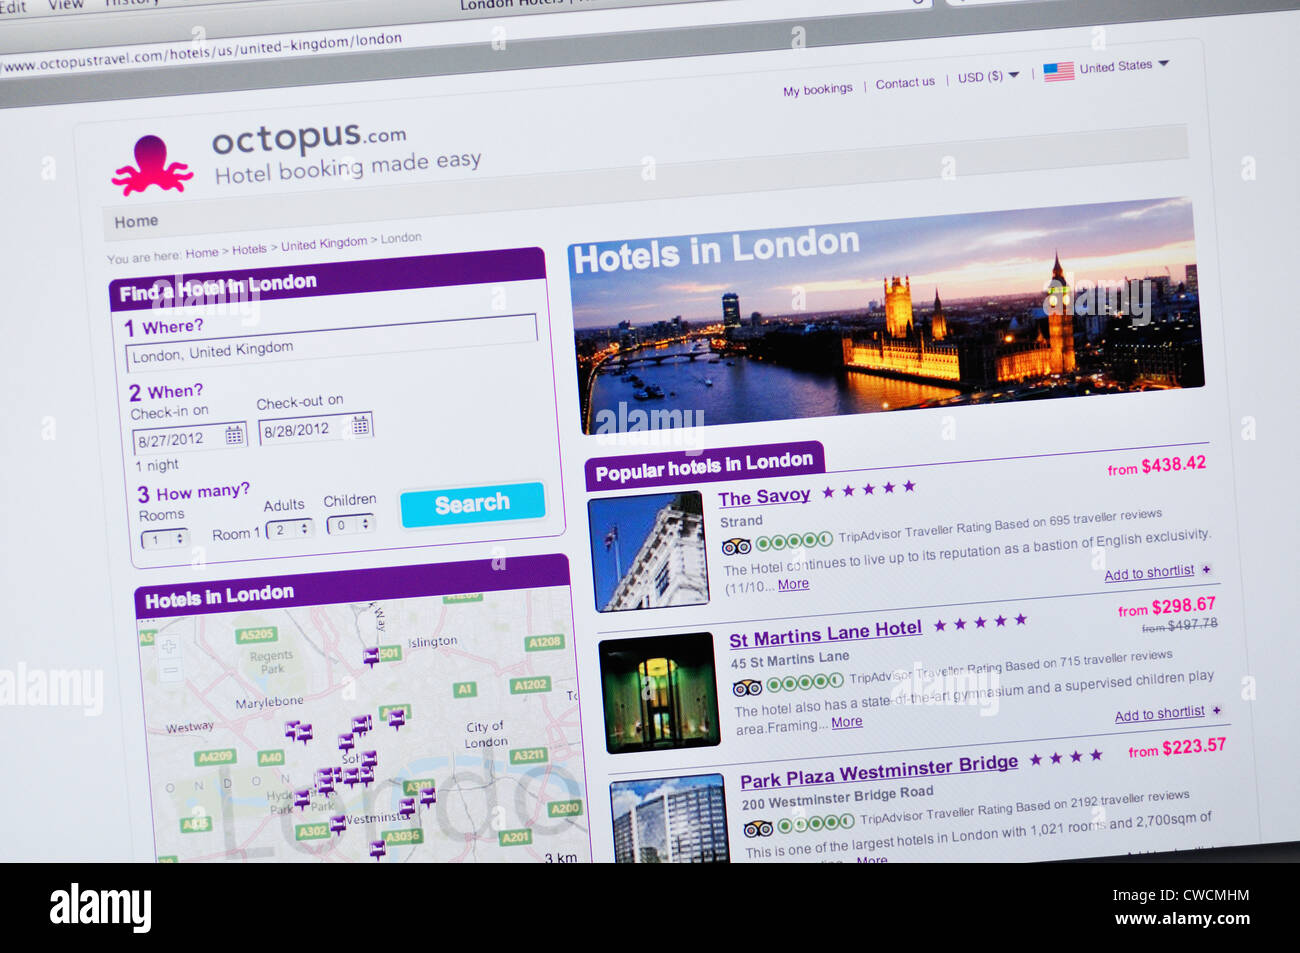 Octopus Travel website - London hotel search Stock Photo